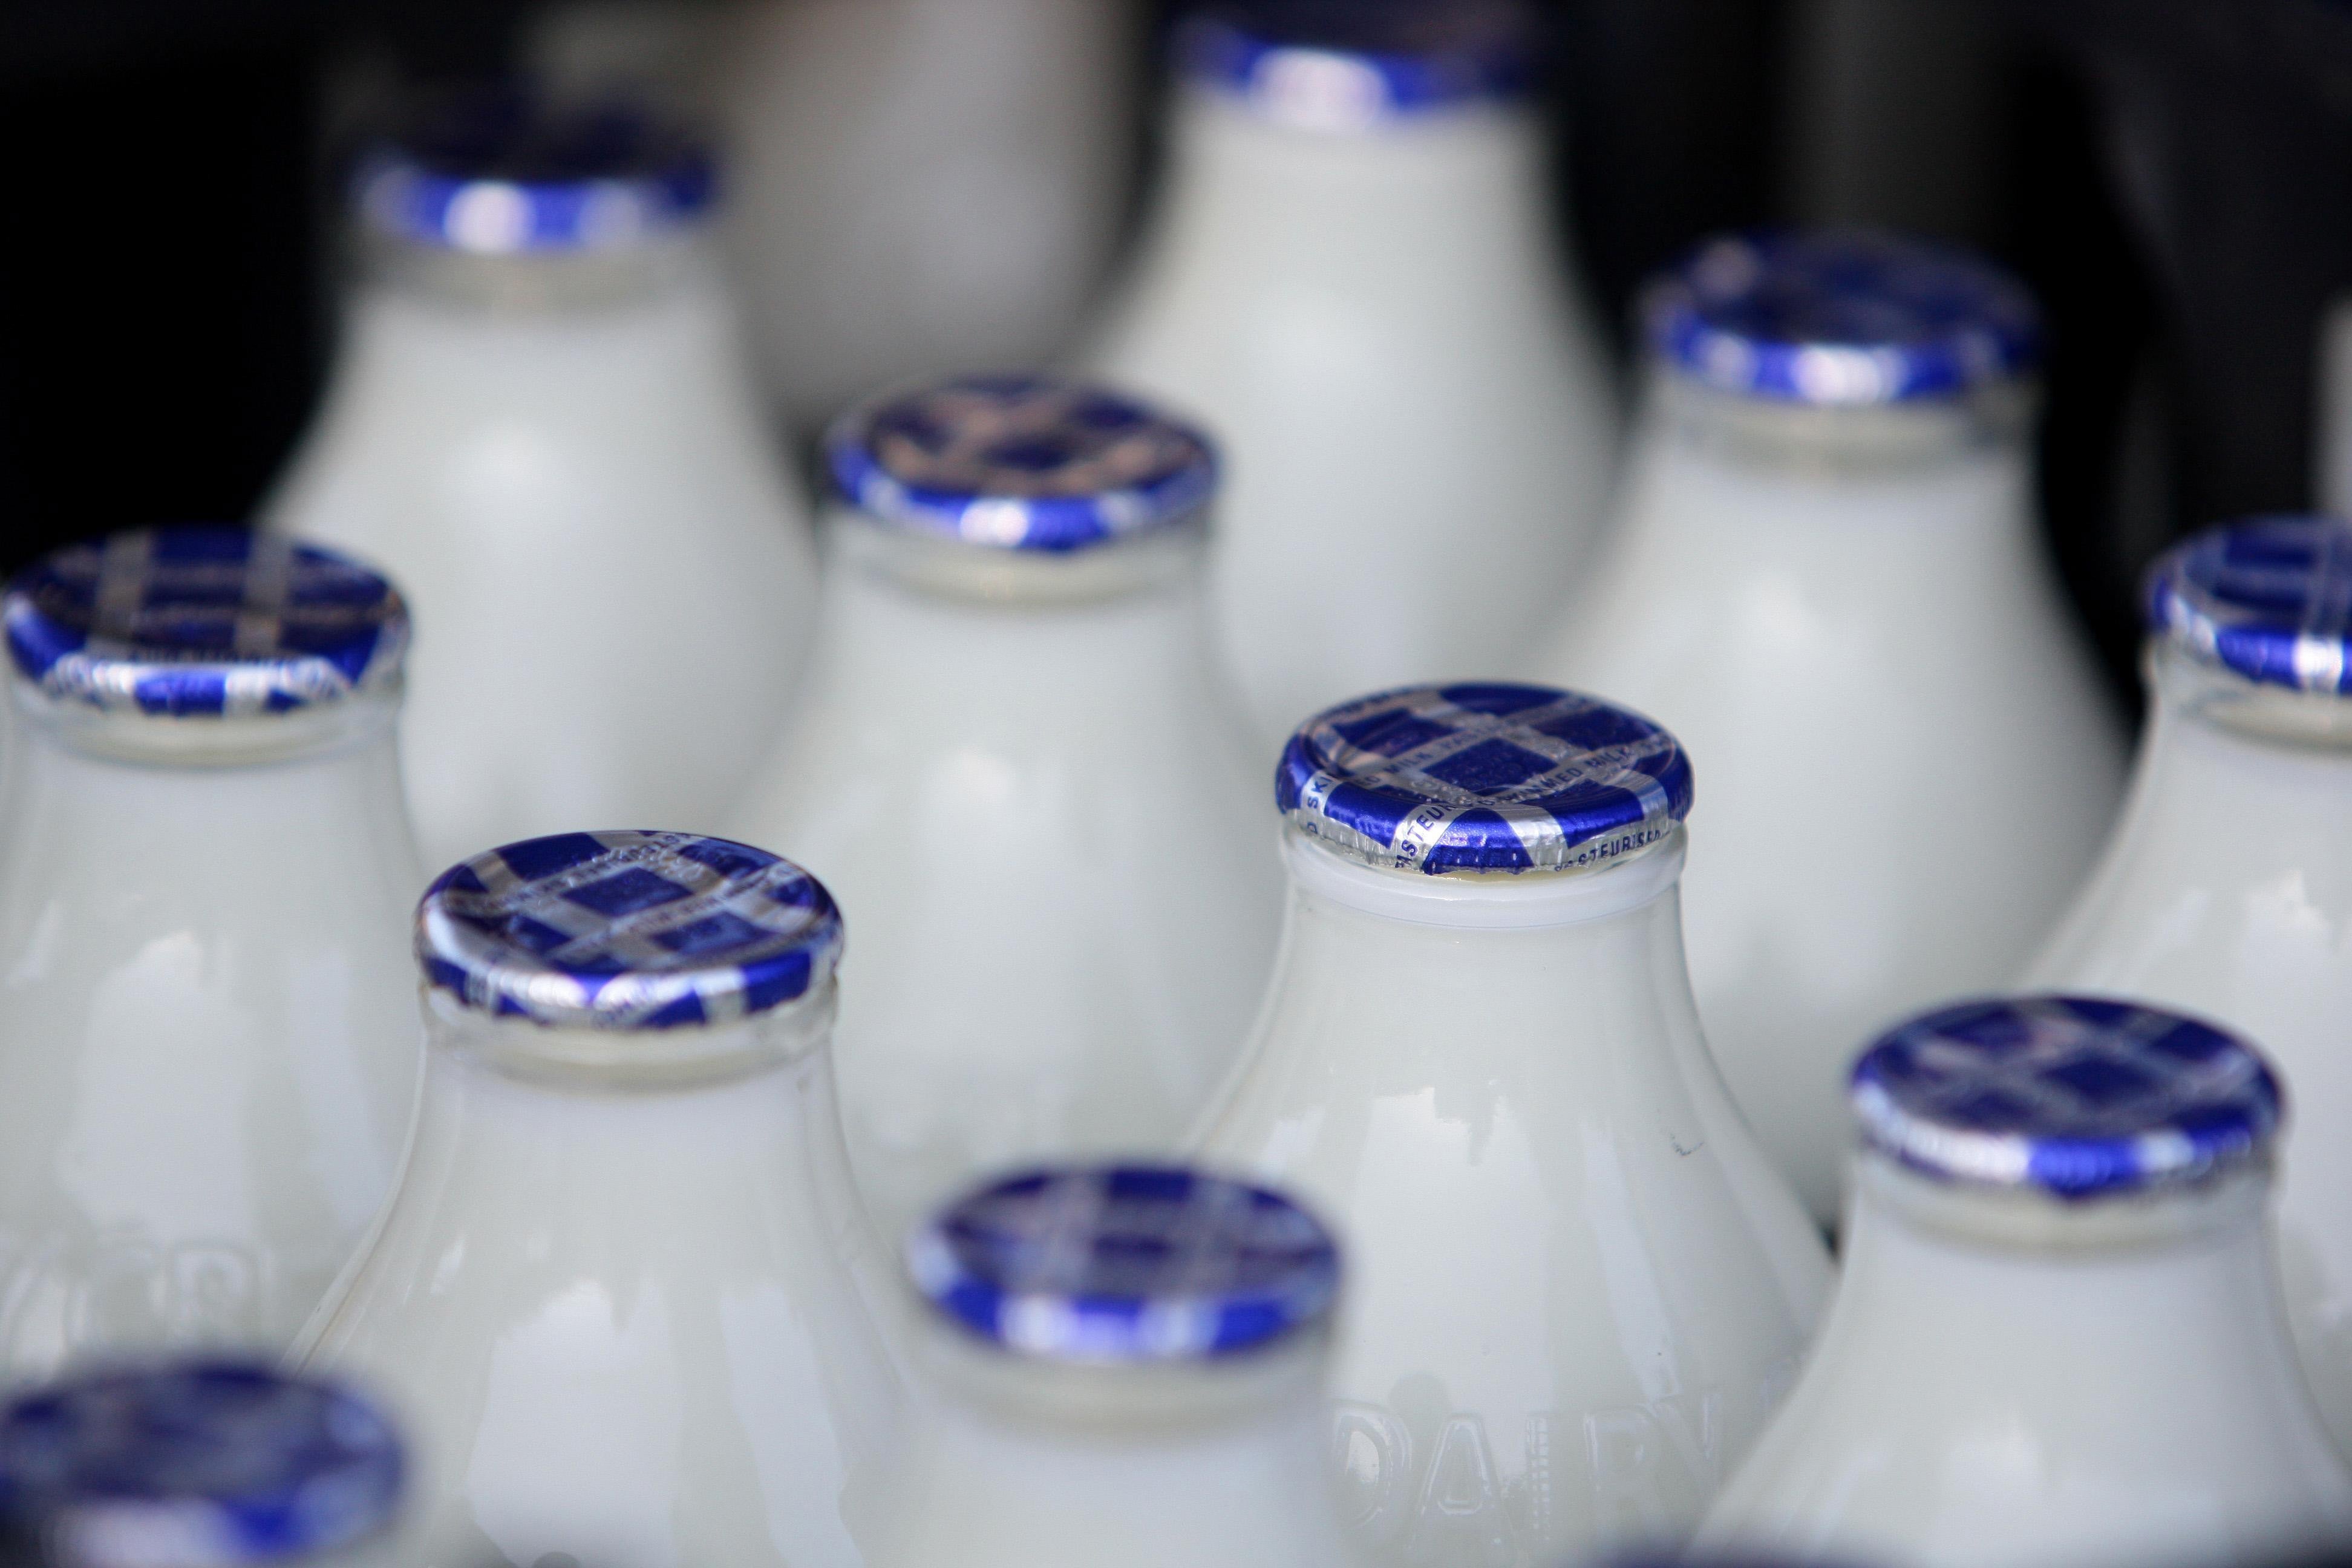 Dairy giant Arla says milk supplies could be disrupted by a lack of lorry drivers